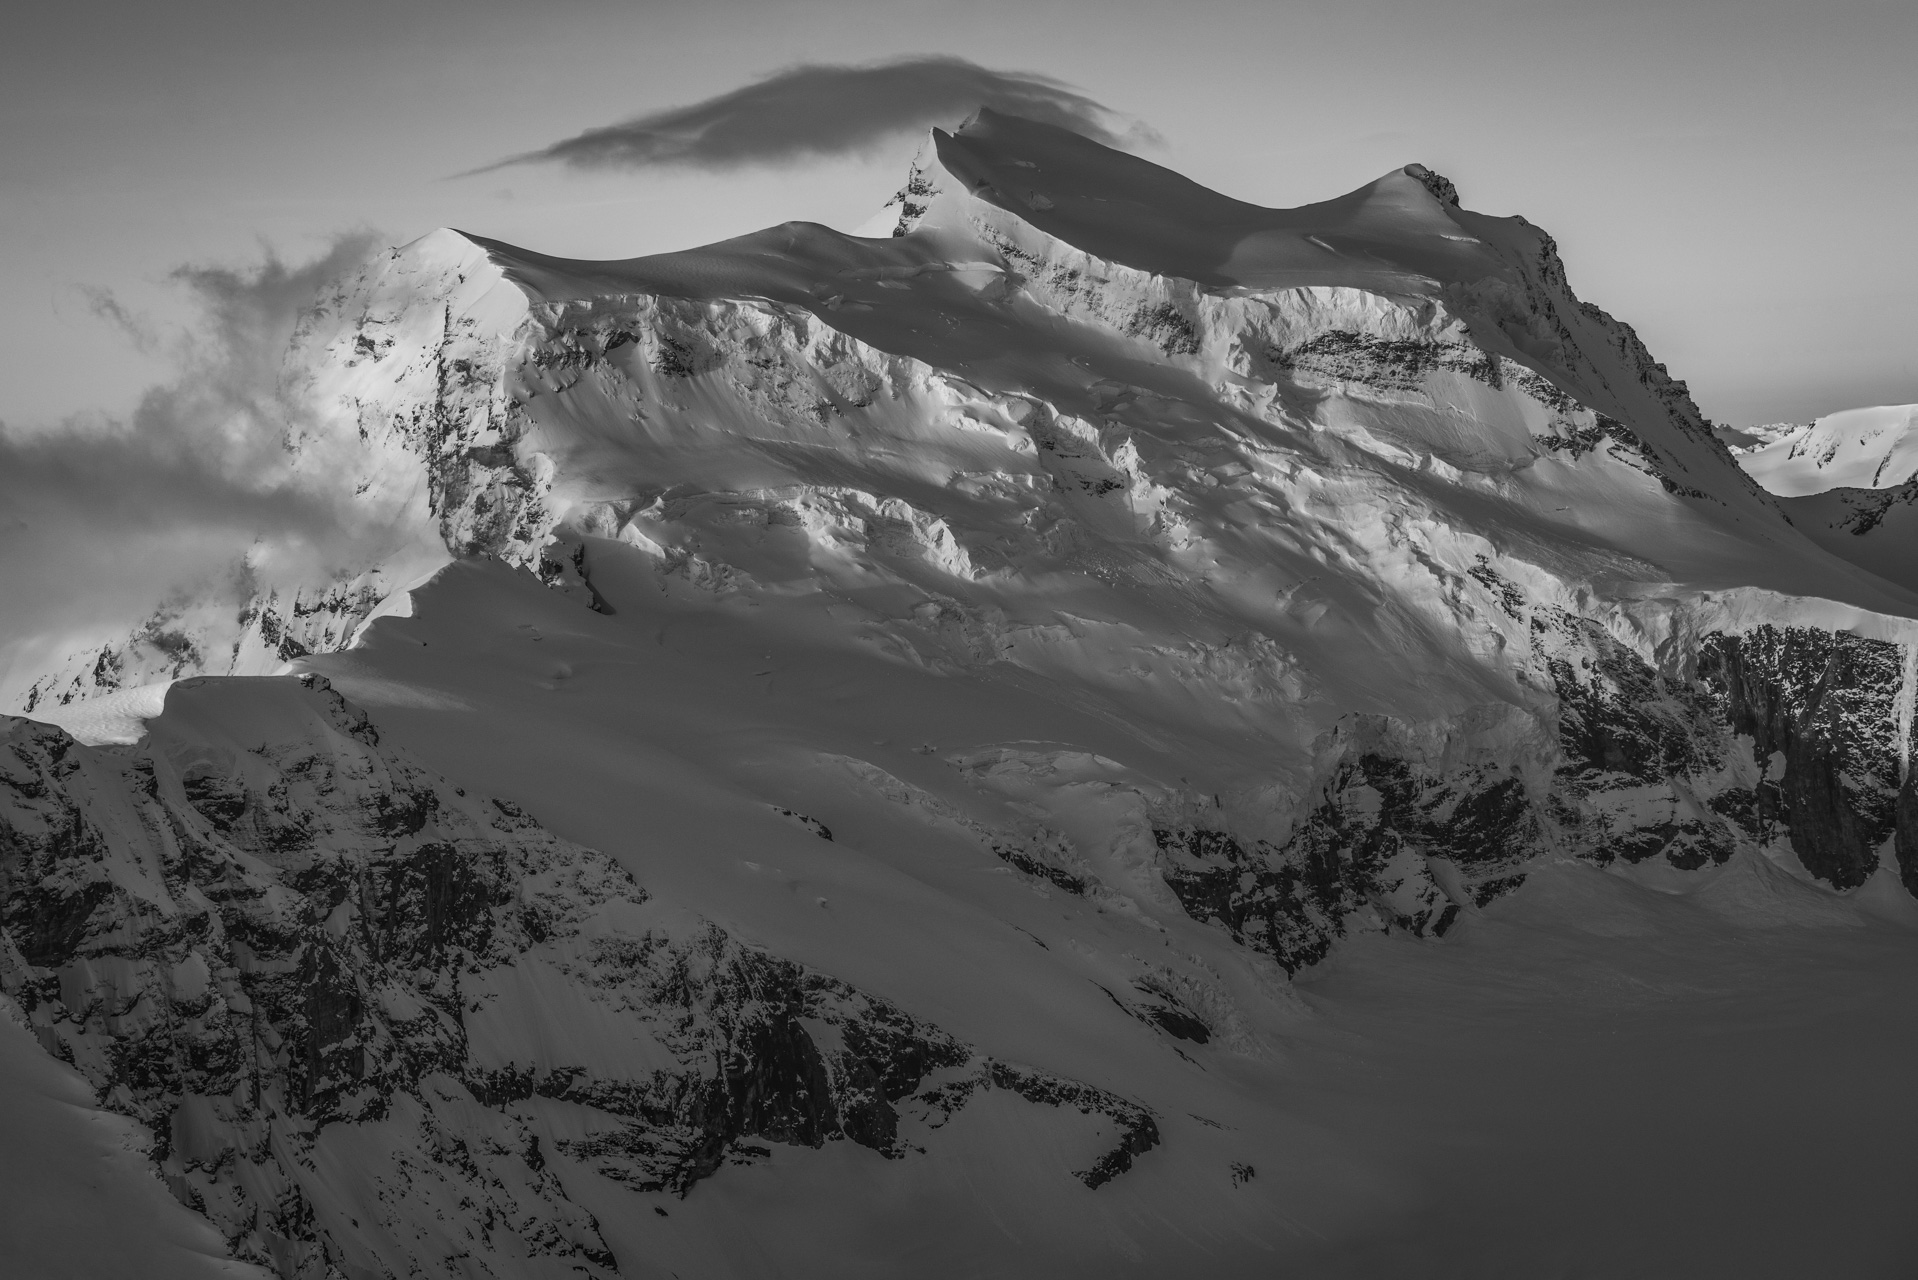 Mountain photo at Verbier Switzerland val de bagnes - snowy mountain image in black and white